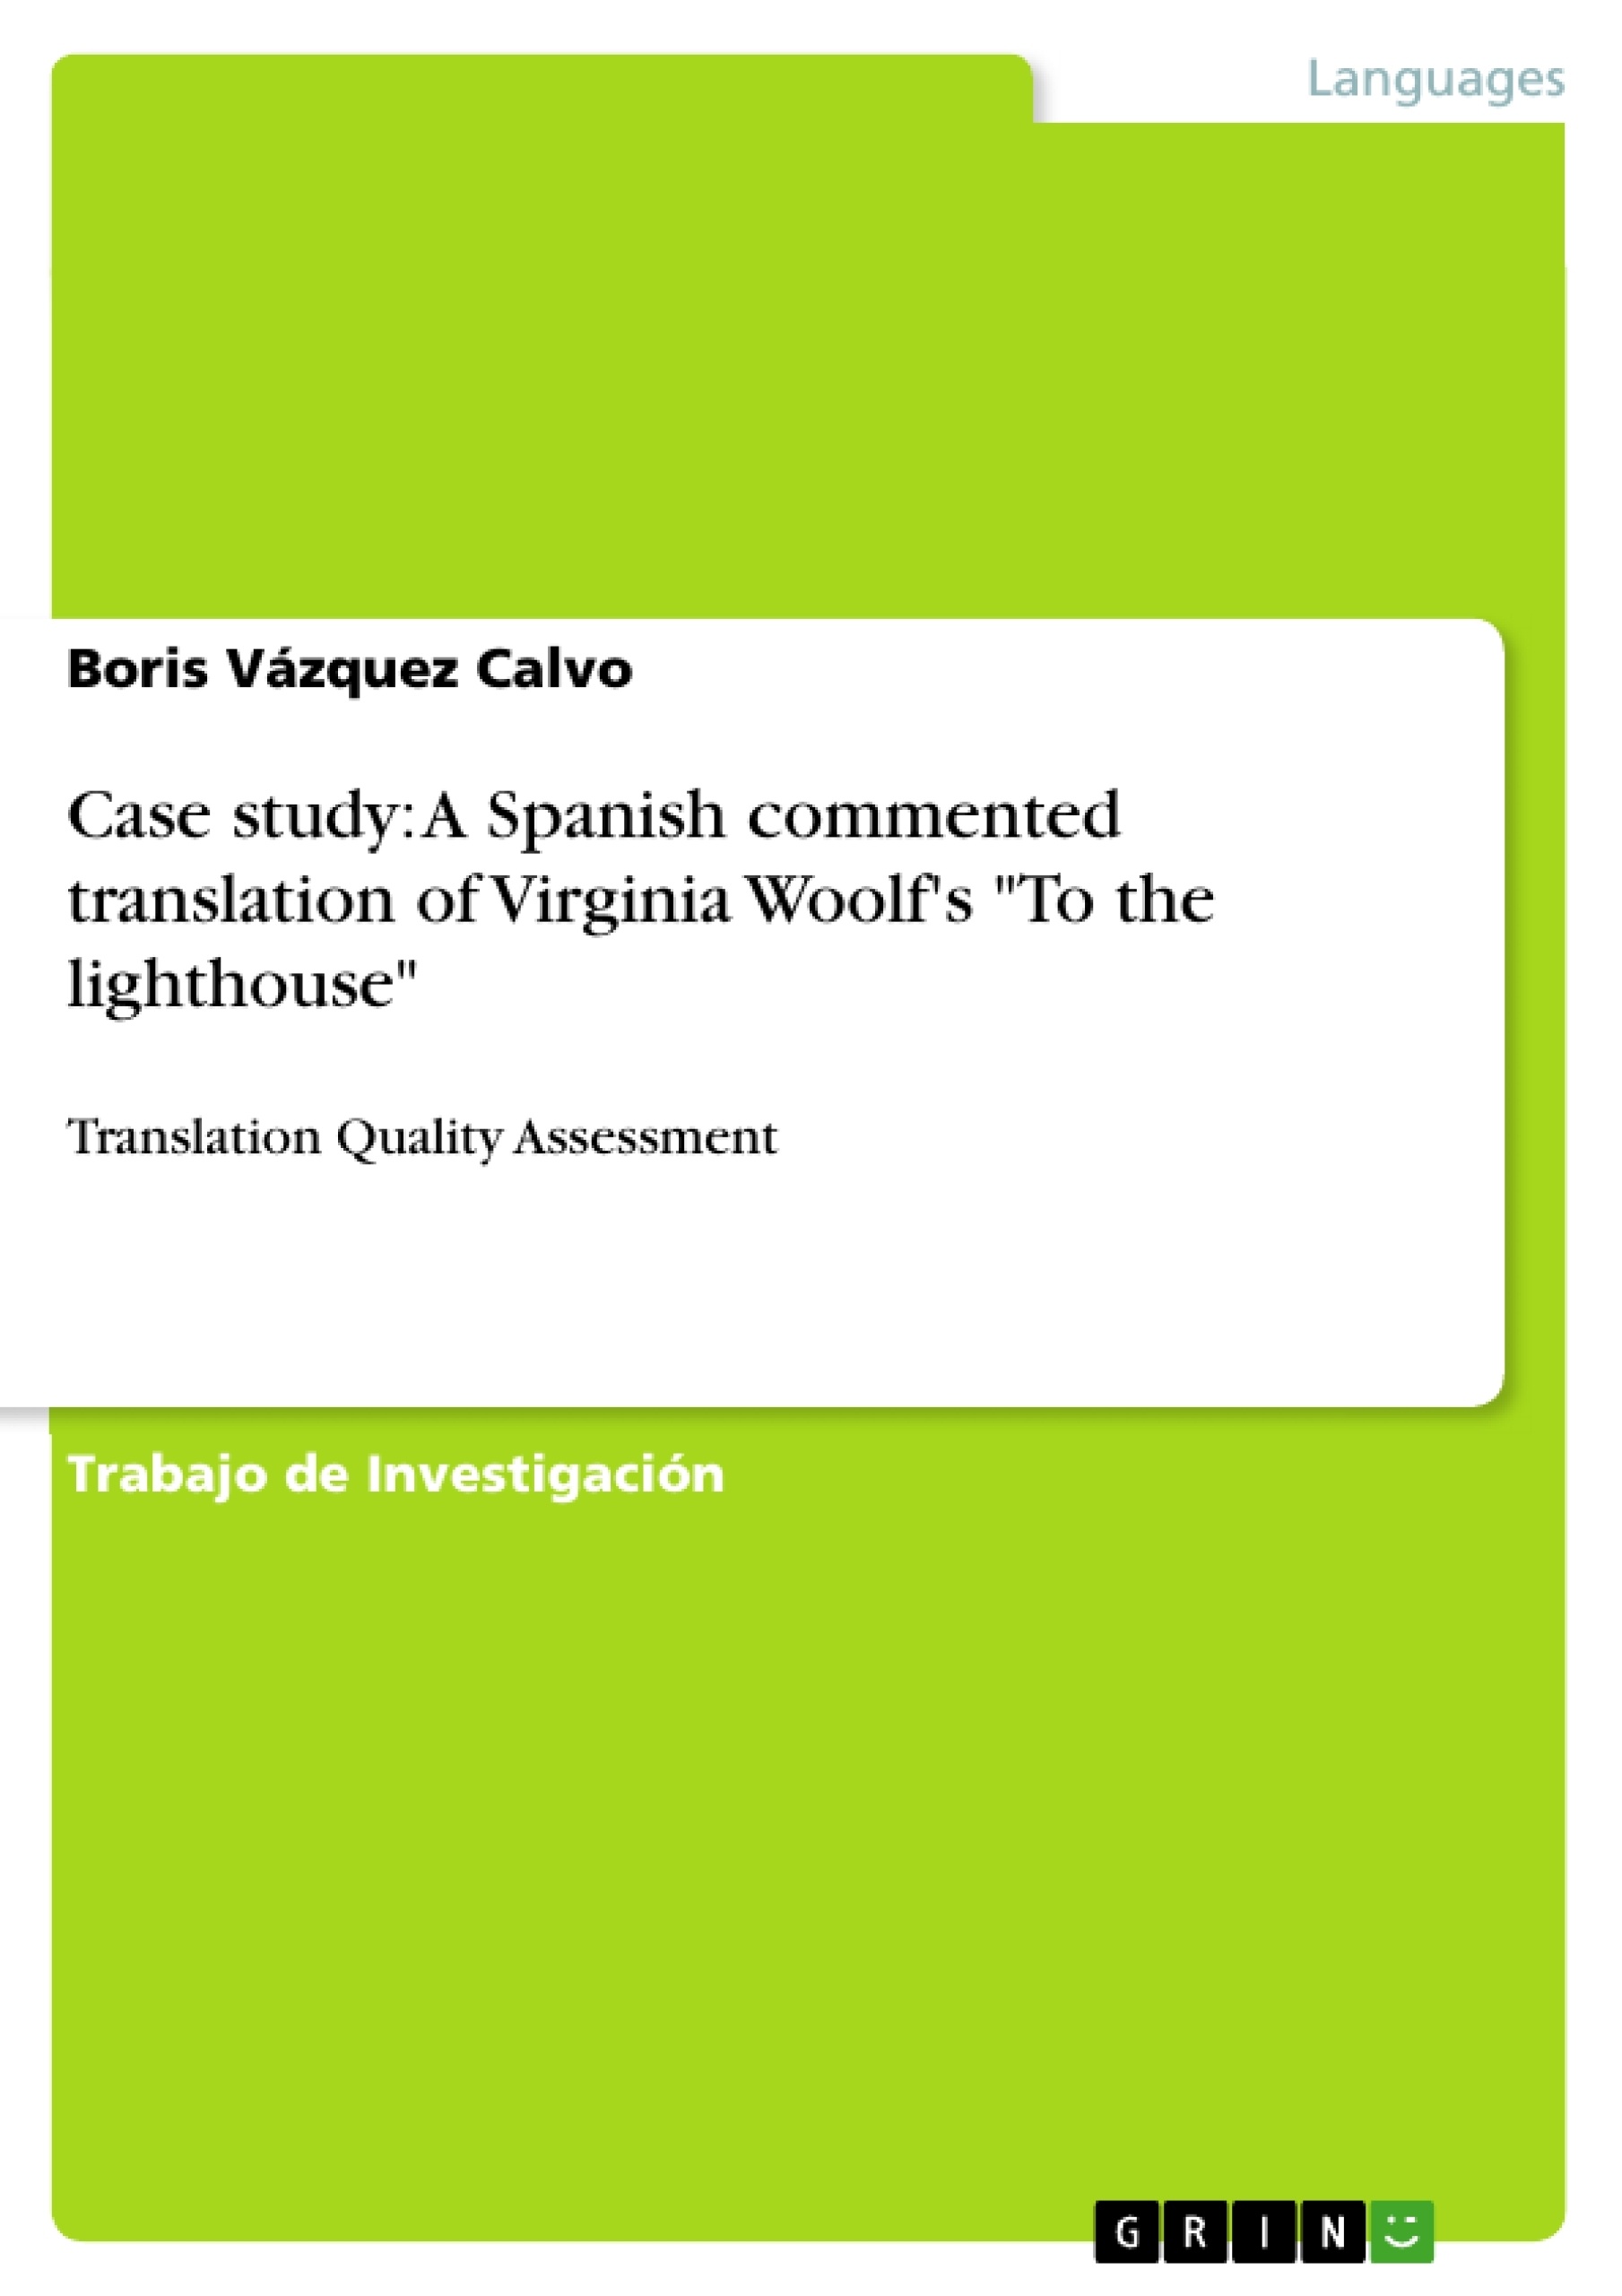 Título: Case study: A Spanish commented translation of Virginia Woolf's "To the lighthouse"